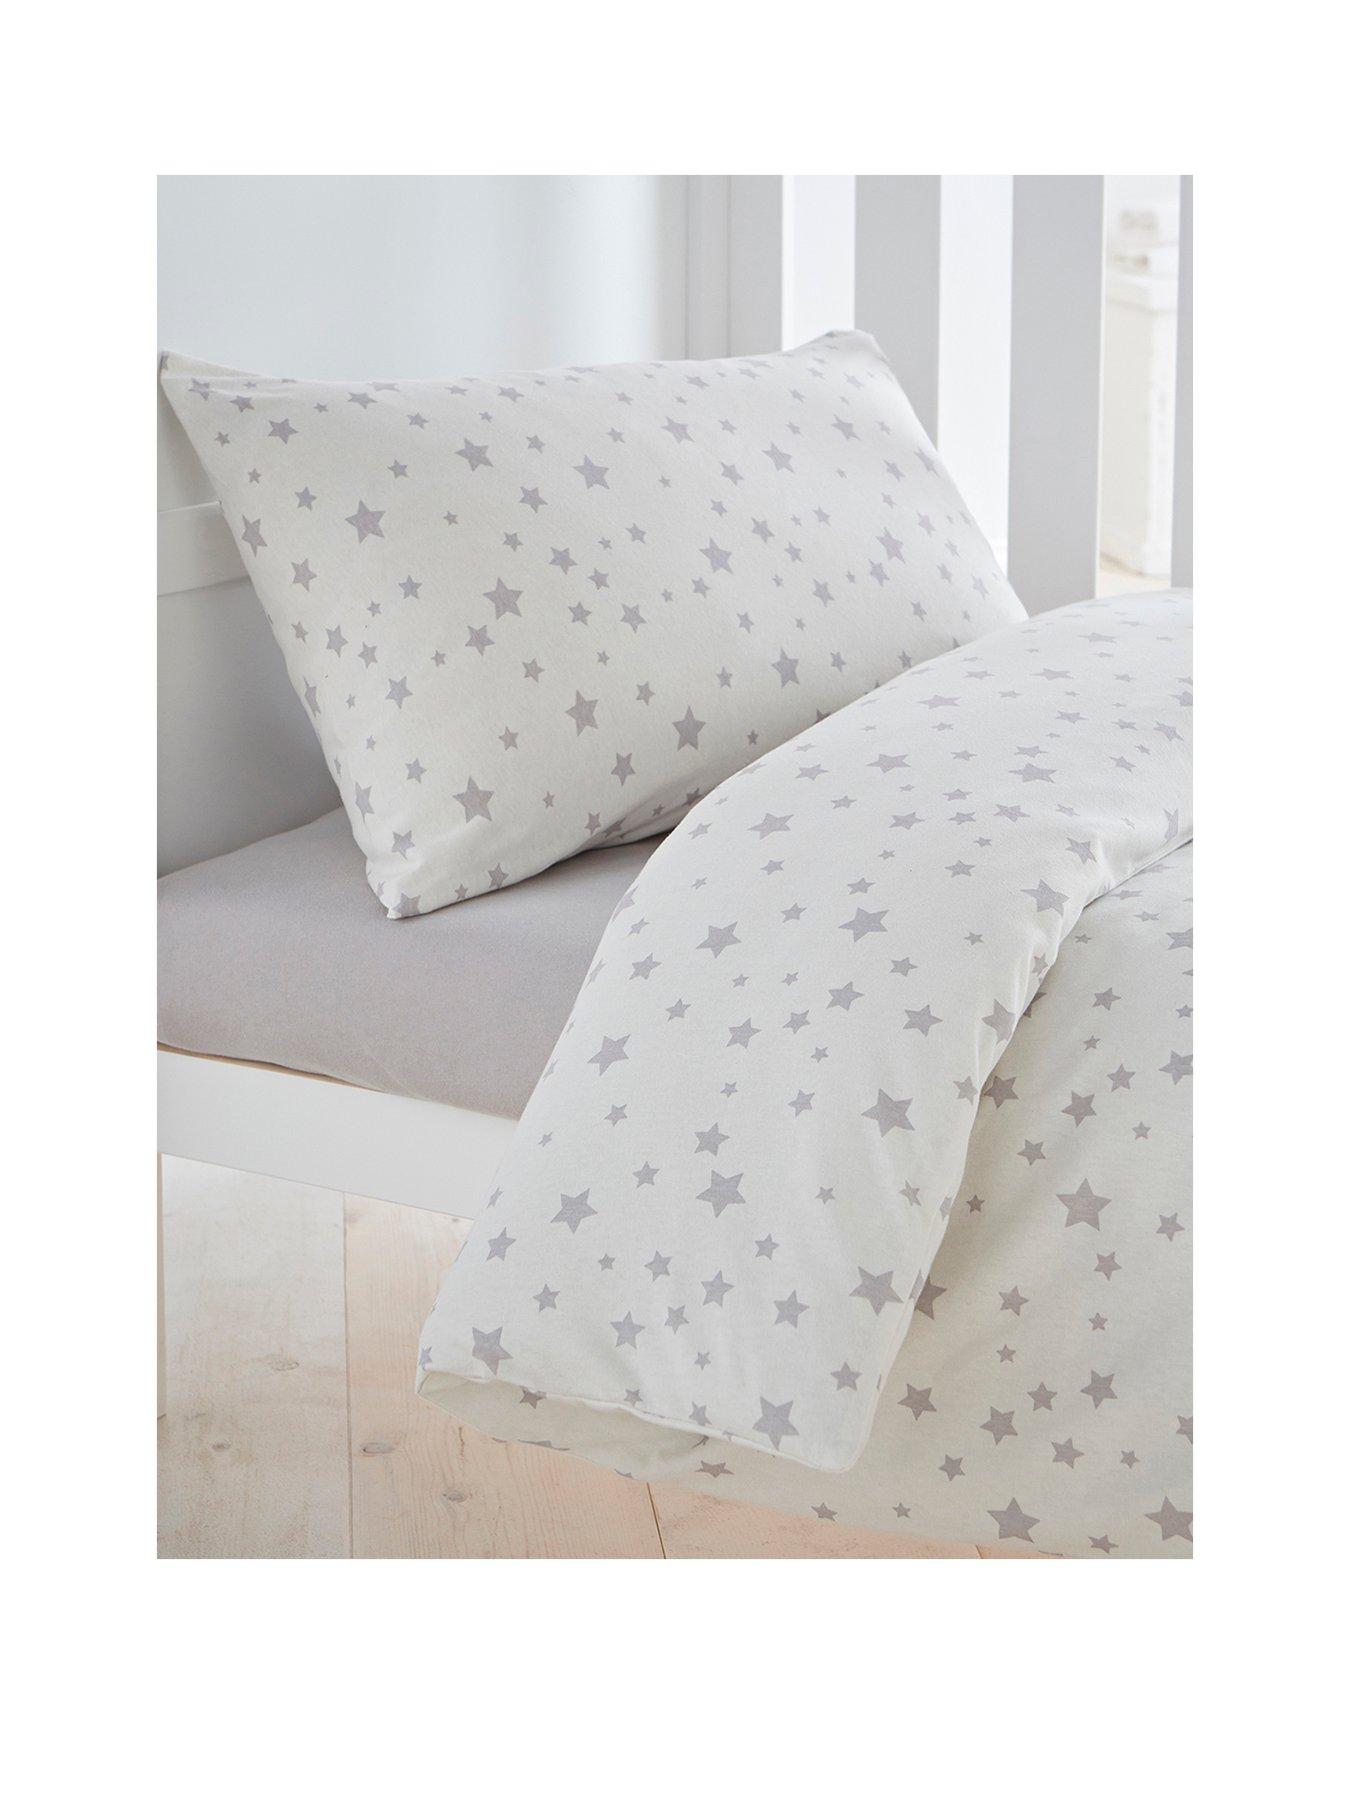 cot bed star bedding